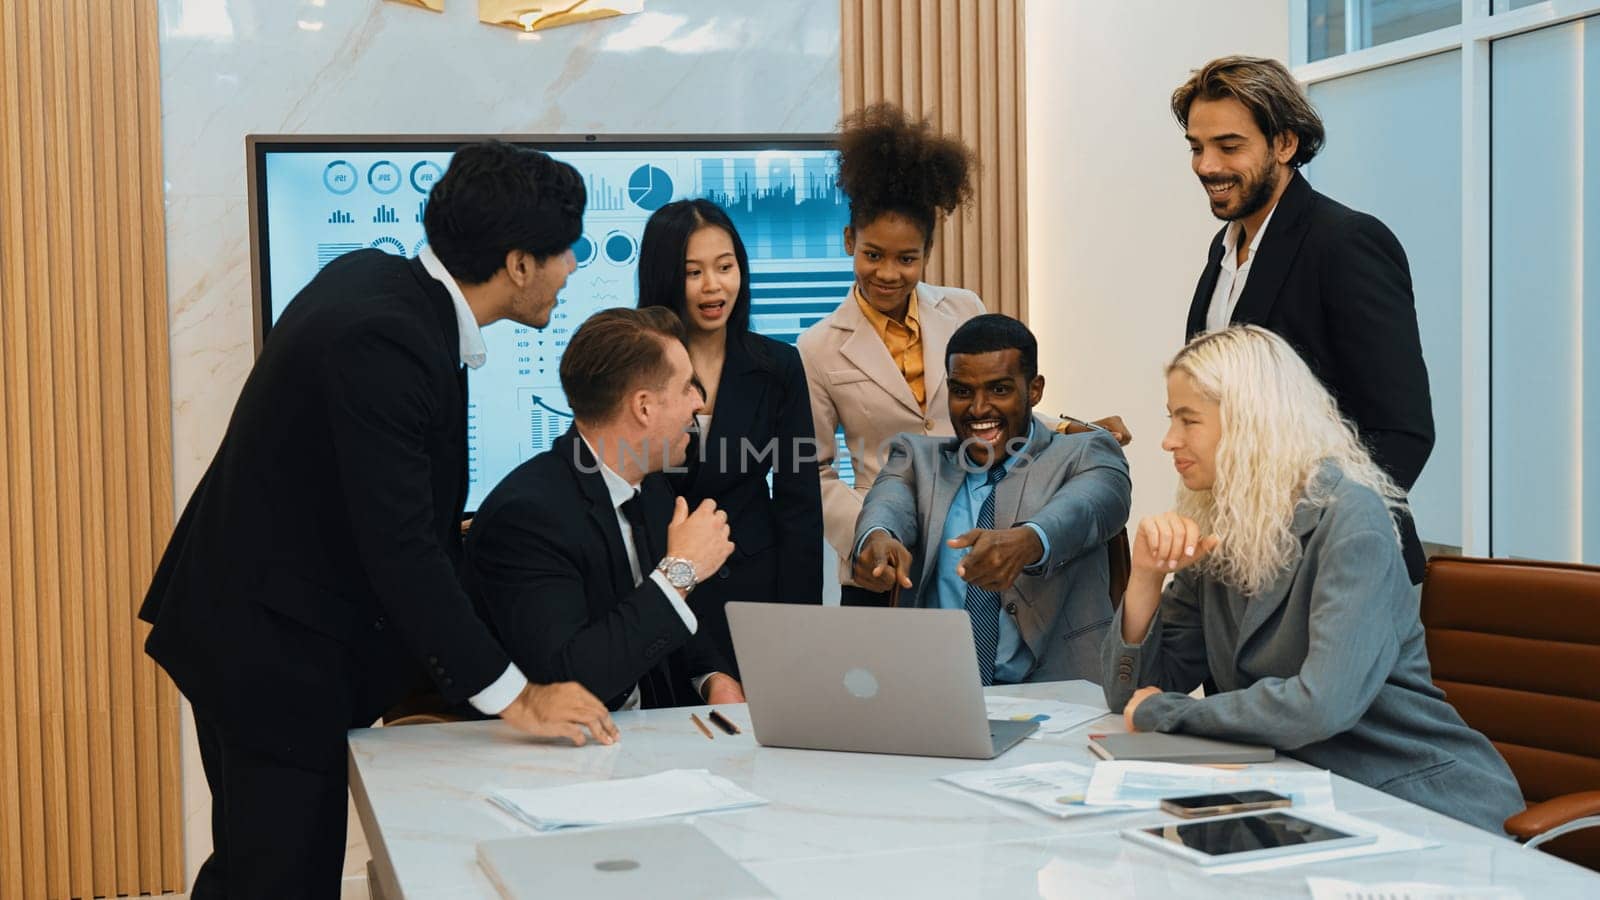 Diverse group of office worker and employee applauding, happy collaborate on strategic business marketing planning. Teamwork and positive attitude create productive and supportive in ornamented office